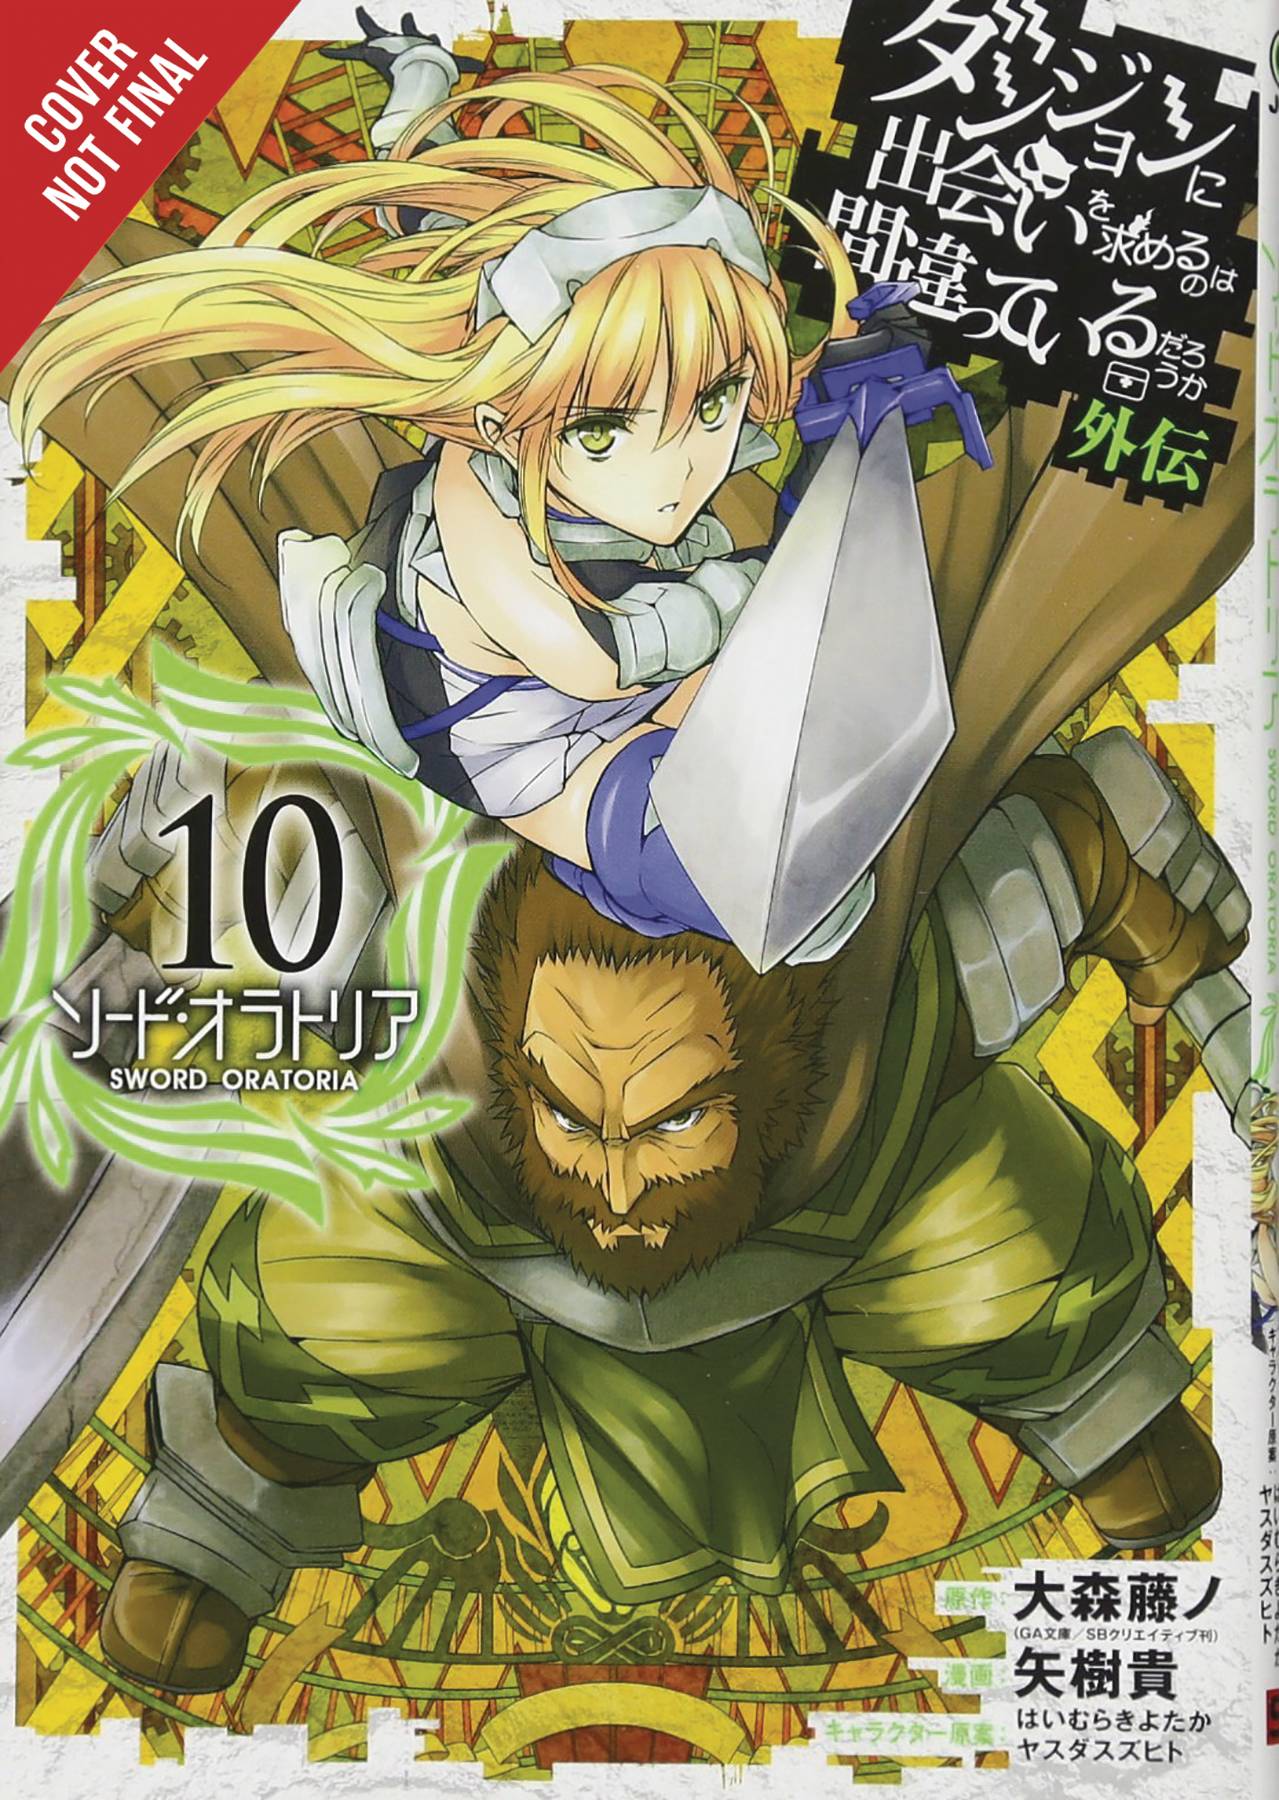 Is It Wrong to Try to Pick Up Girls in a Dungeon?: Sword Oratoria #10 (2020)